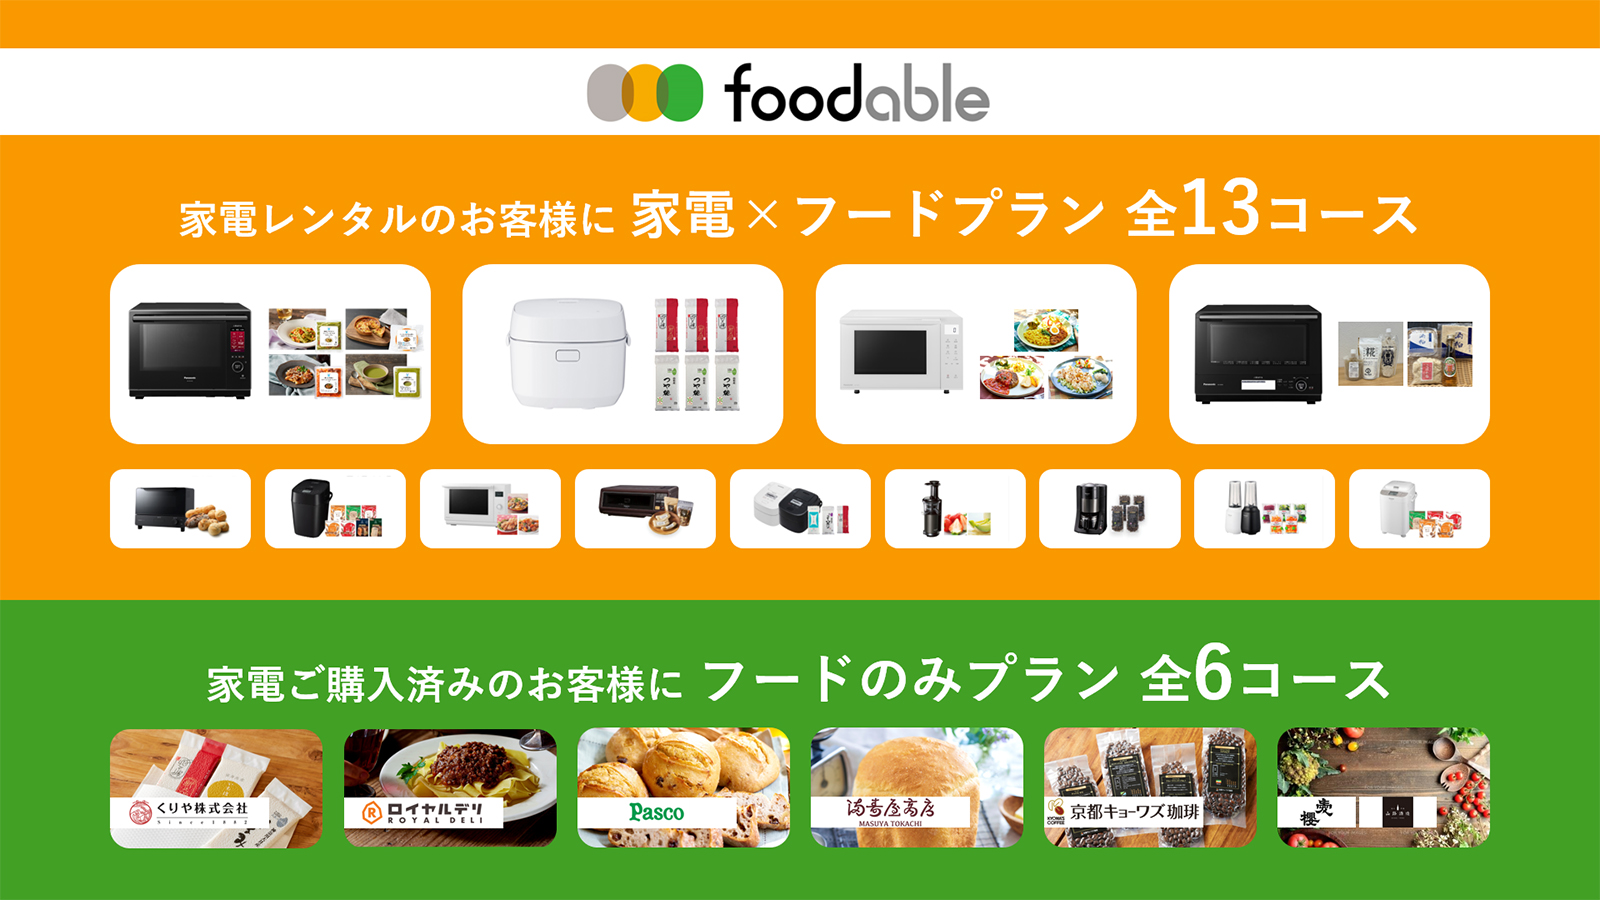 foodable’s Home Appliance x Food Plan